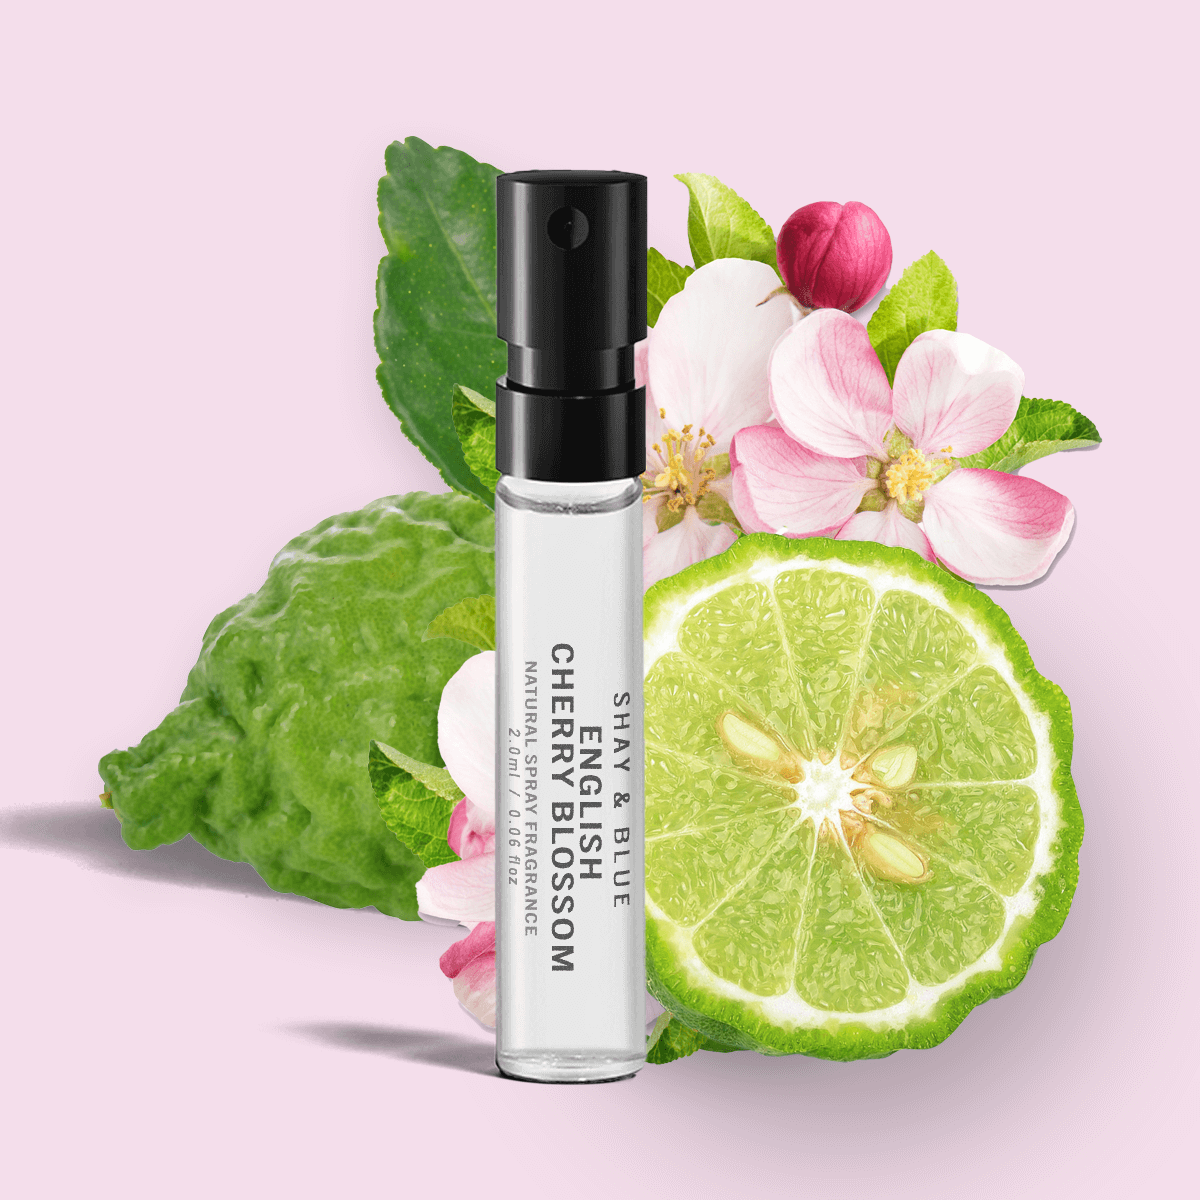 English Cherry Blossom Fragrance 2ml | Airy blossom with black cherries, fig and bergamot for a sparkling citrus lift. | Clean All Gender Fragrance | Shay & Blue